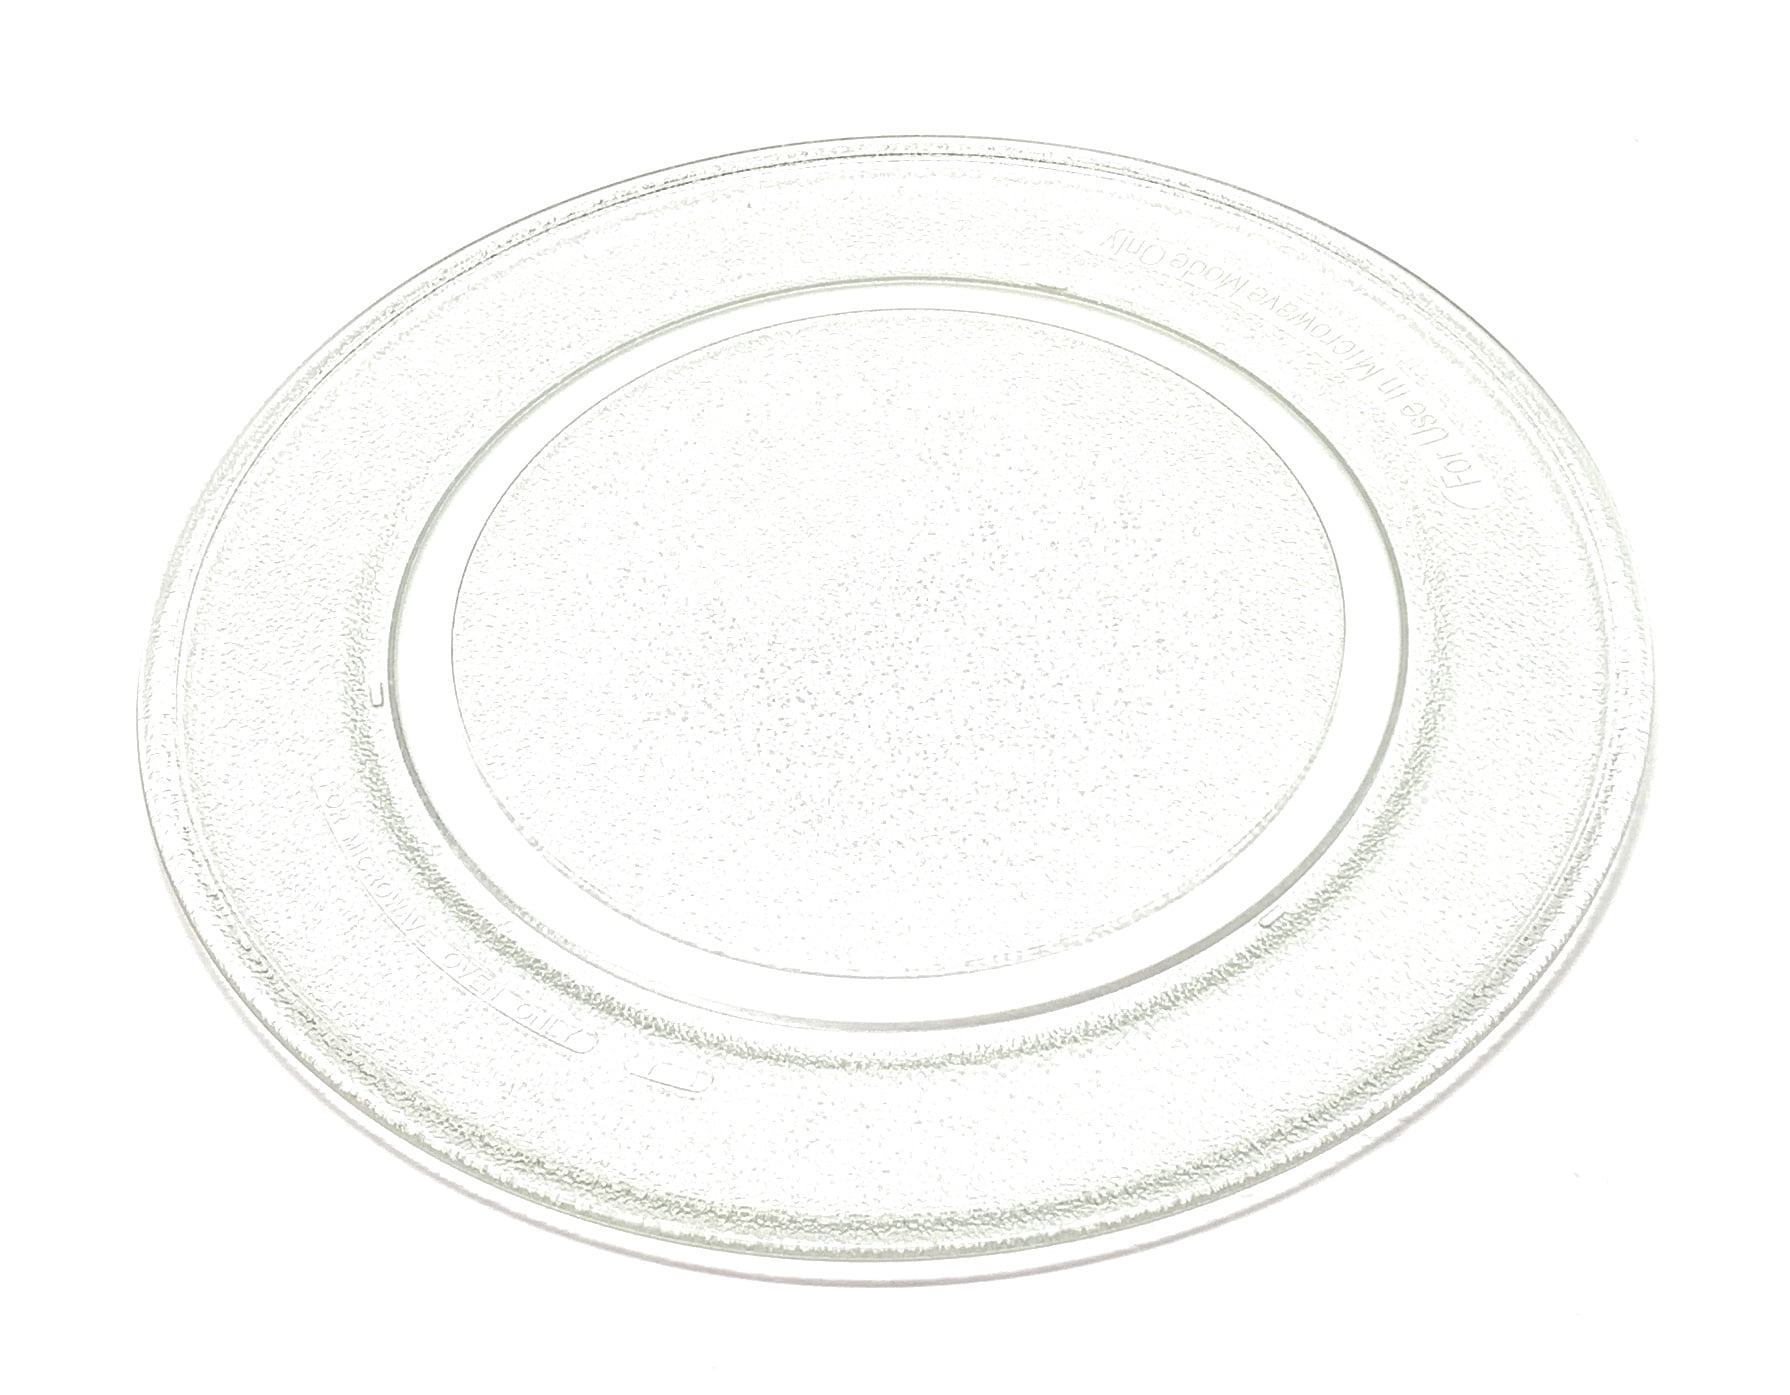 OGYU701 OGT6701-9 5/8" Microwave Glass Turntable Plate Tray for Oster OGG3701 